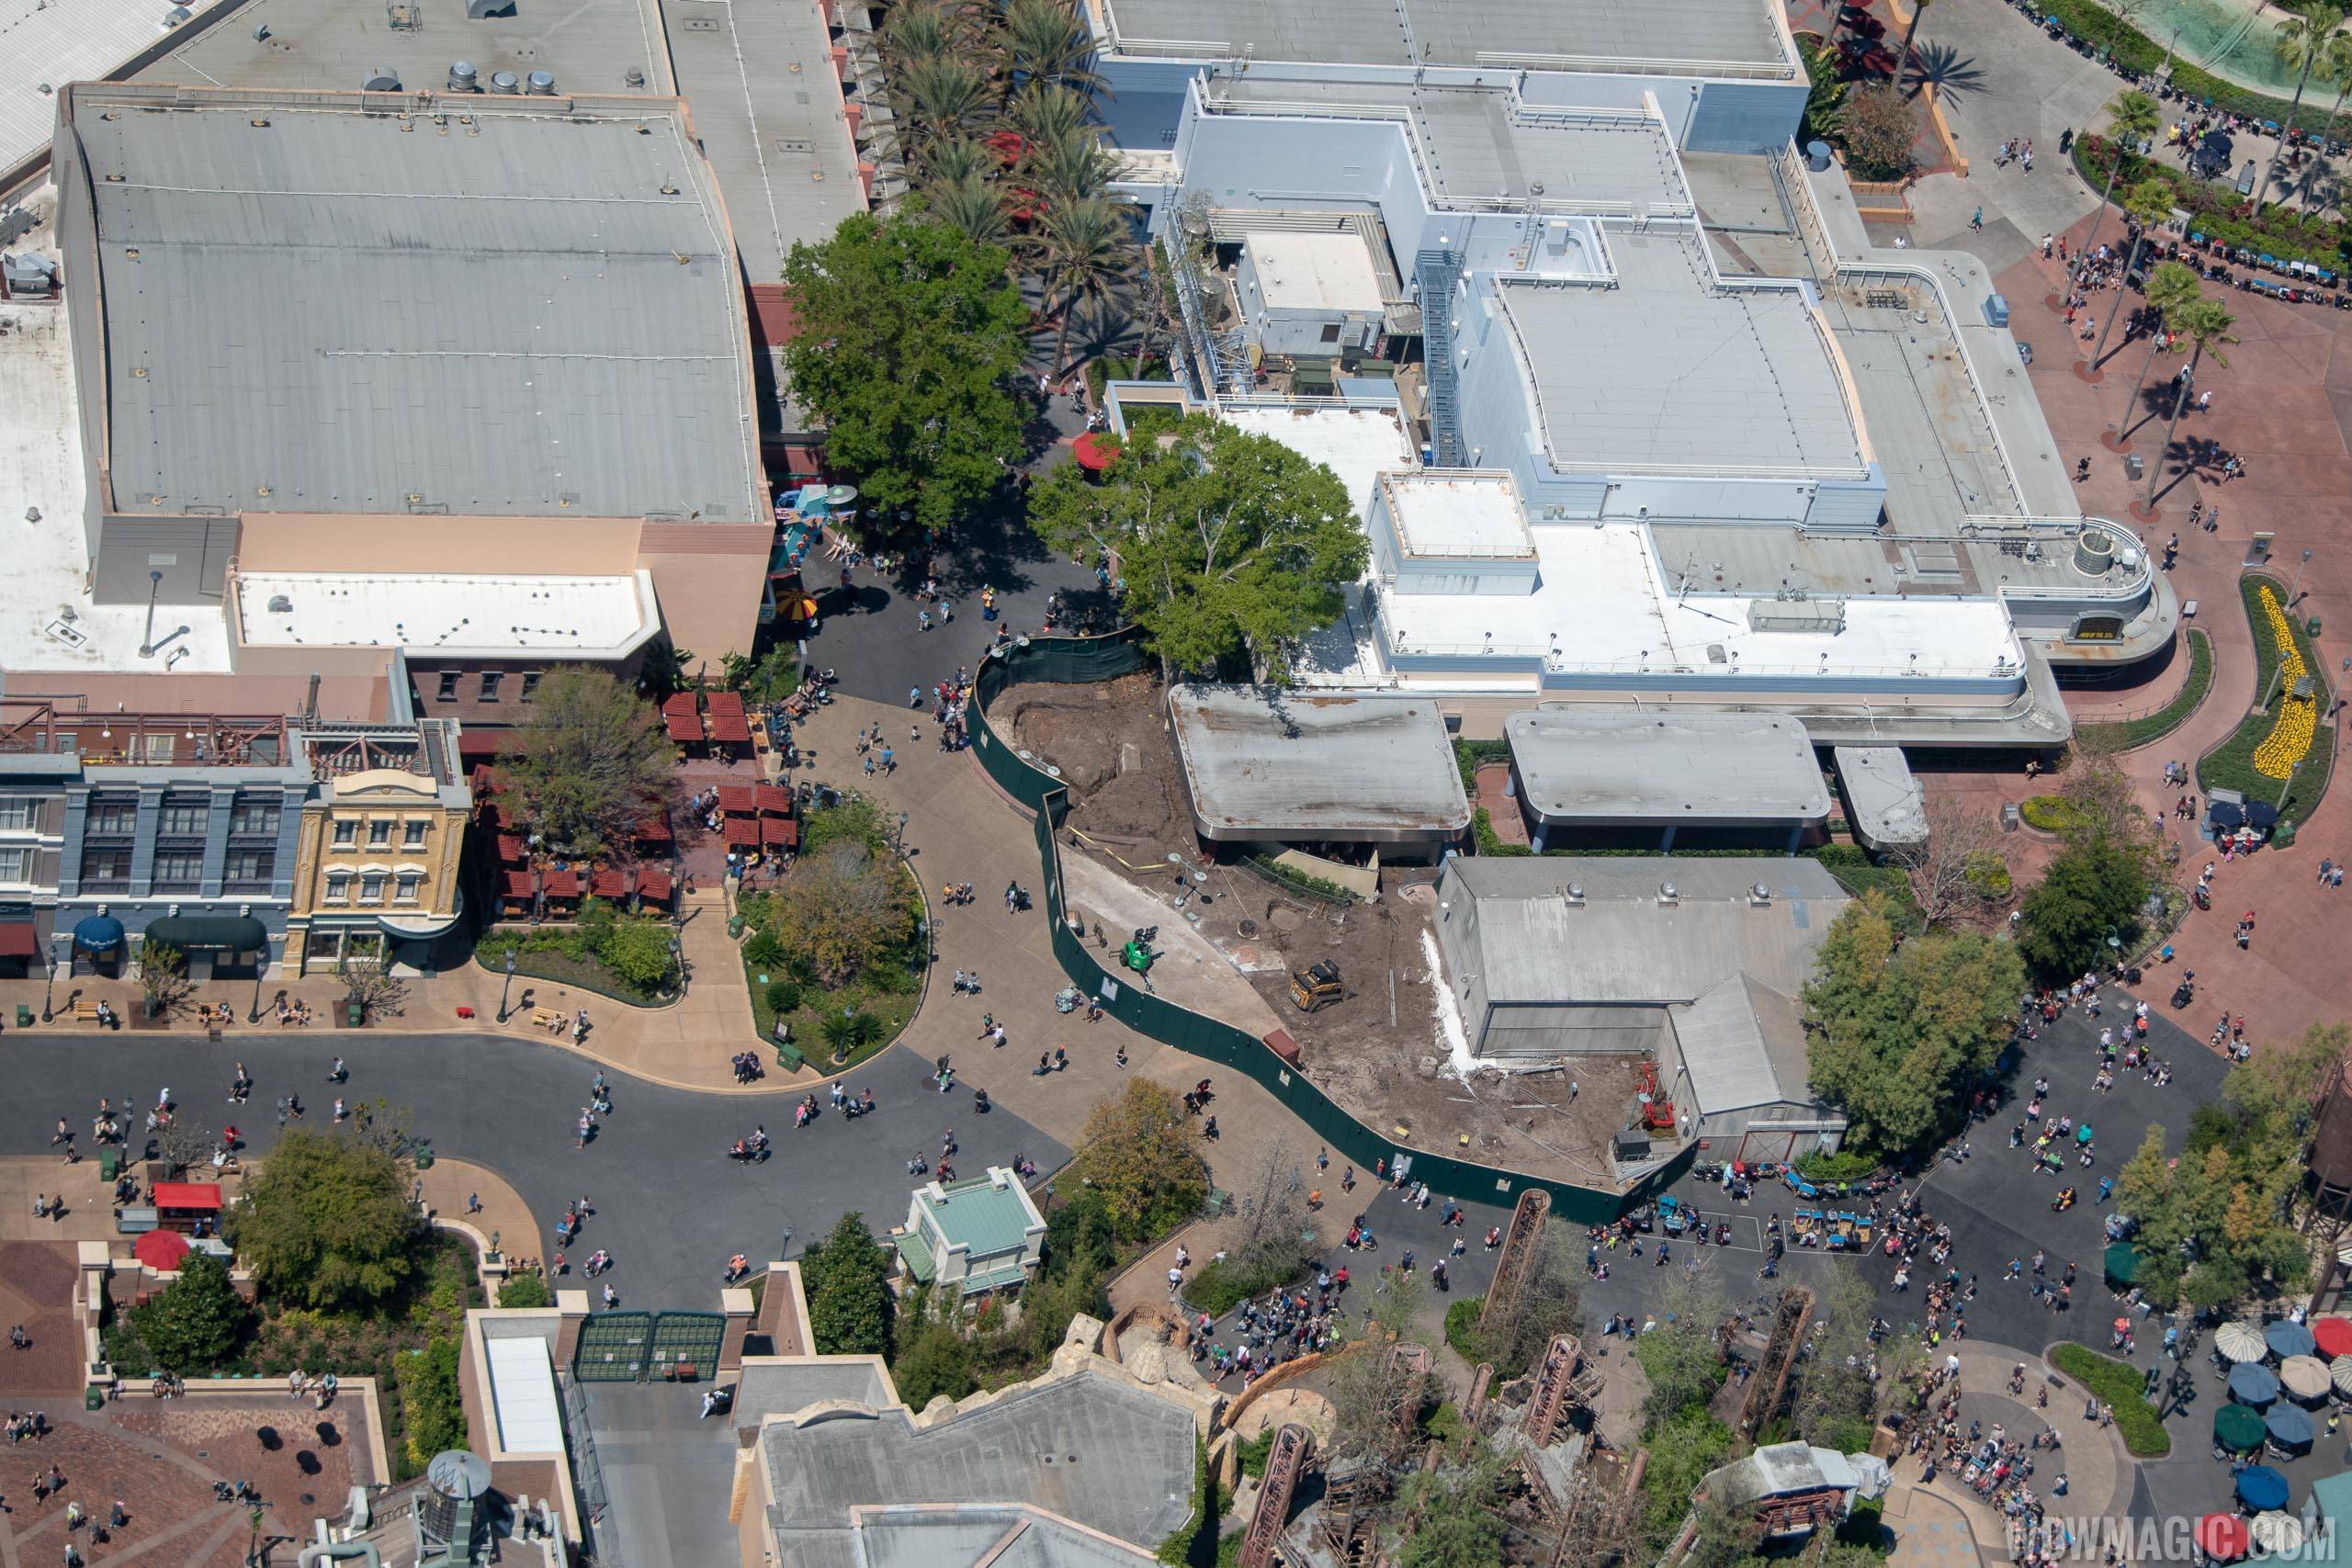 PHOTOS - Changes come to Grand Avenue and Star Tours areas ahead of Galaxy's Edge opening this summer